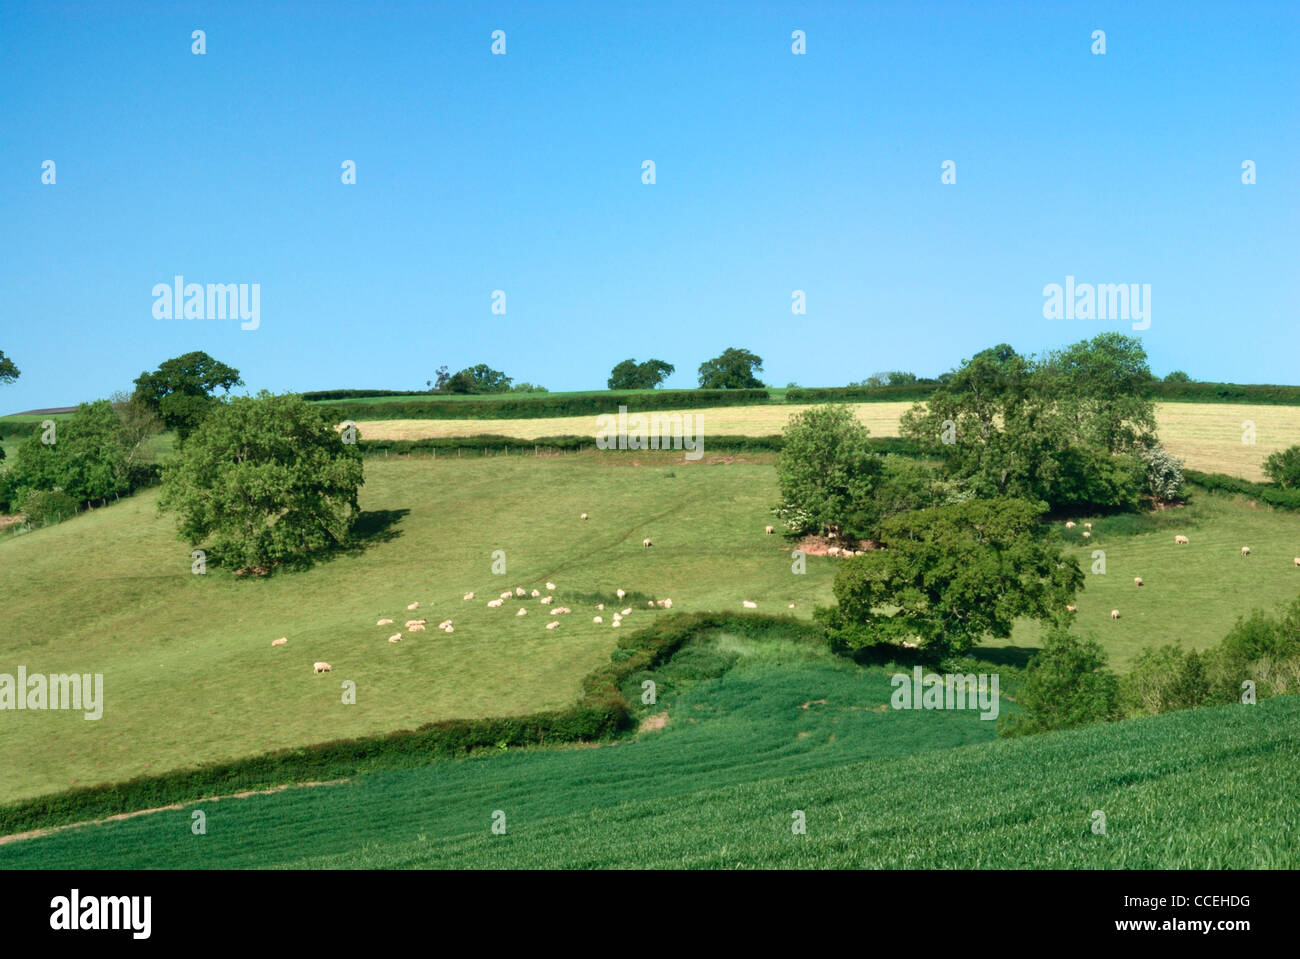 Sheep grazing in the distance, Axe Valley near Axminster, Devon countryside, england, UK Stock Photo